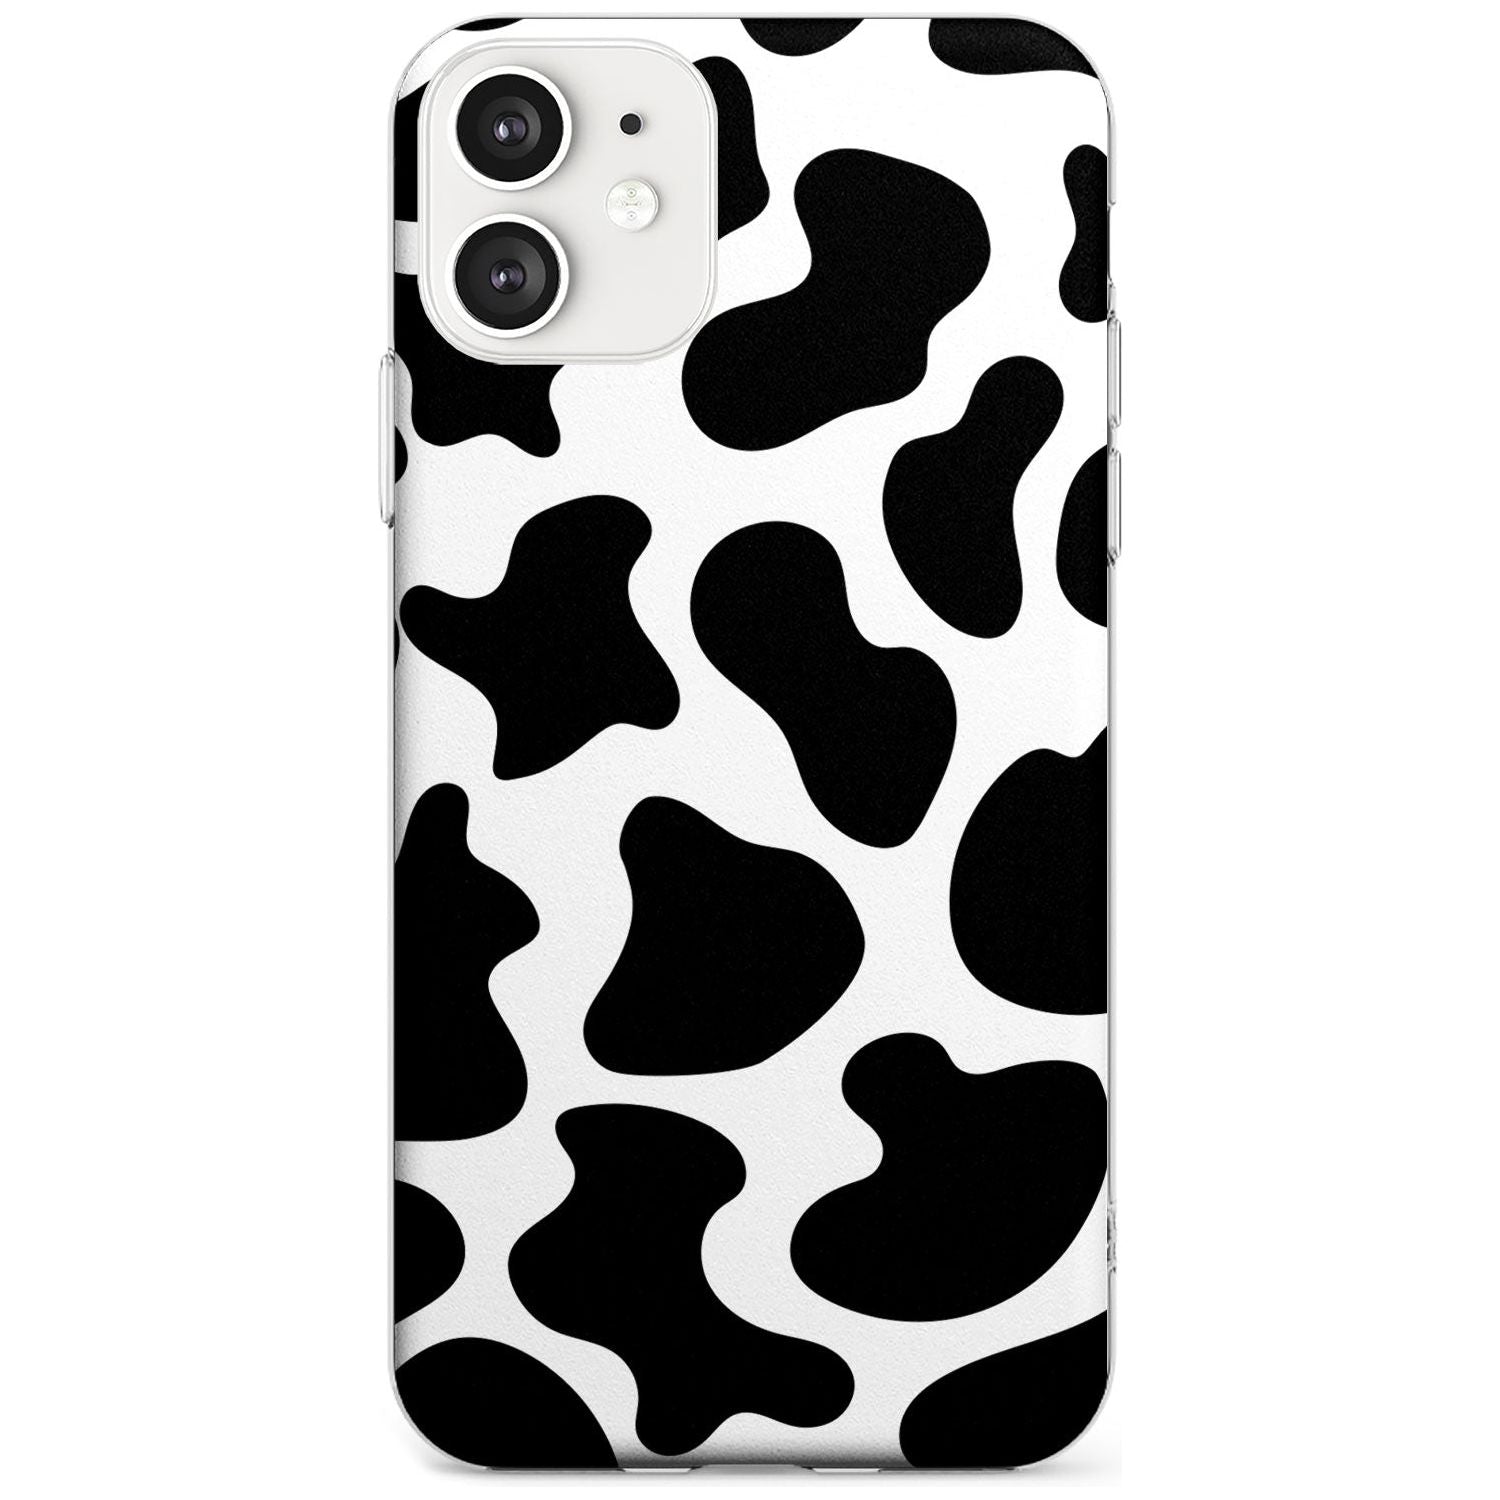 Cow Print Black Impact Phone Case for iPhone 11